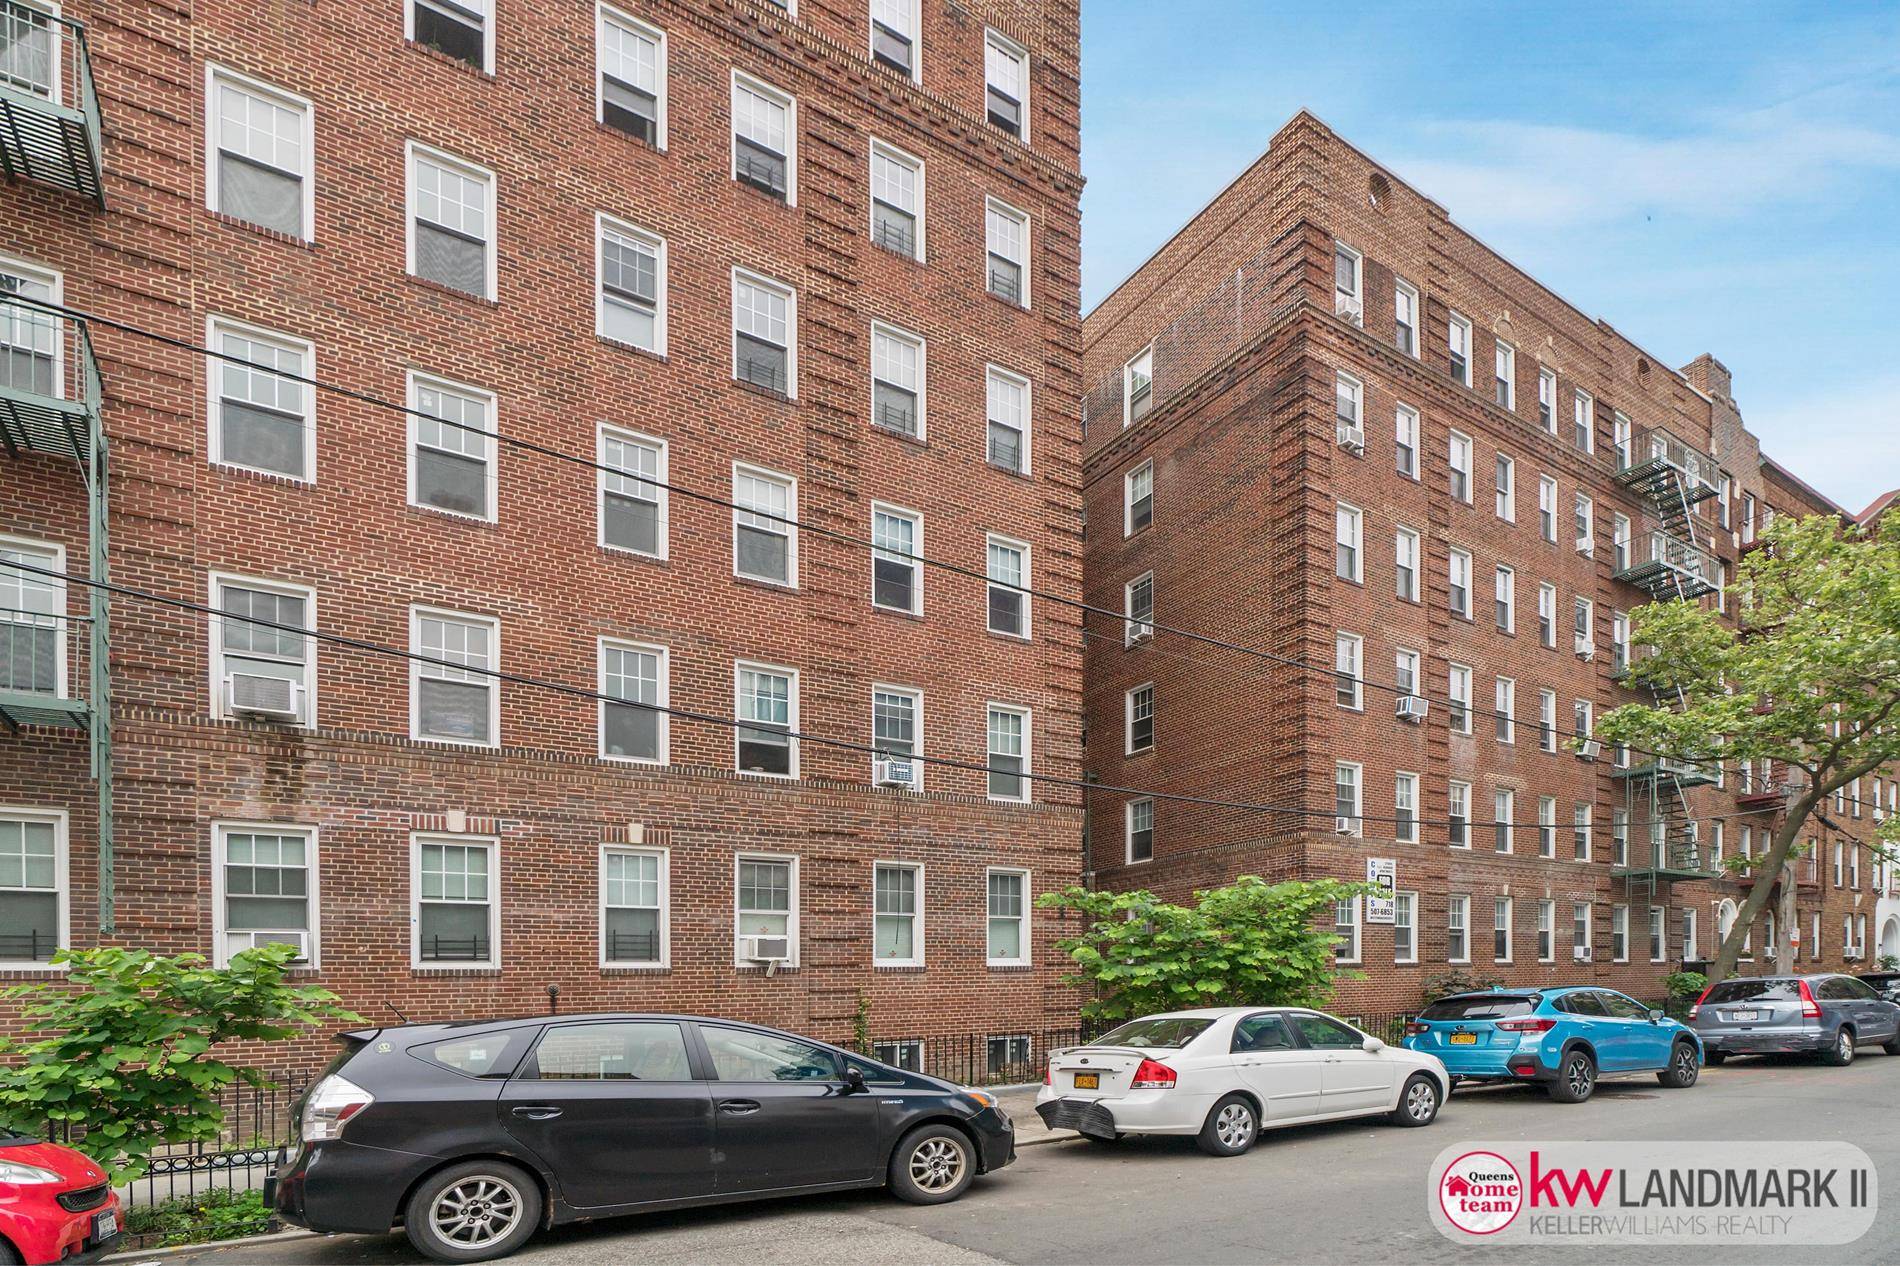 Located in Sunnyside off of Skillman Ave, this awesome, 1 BR 1 BTH unit has enough room for working, resting and playing.